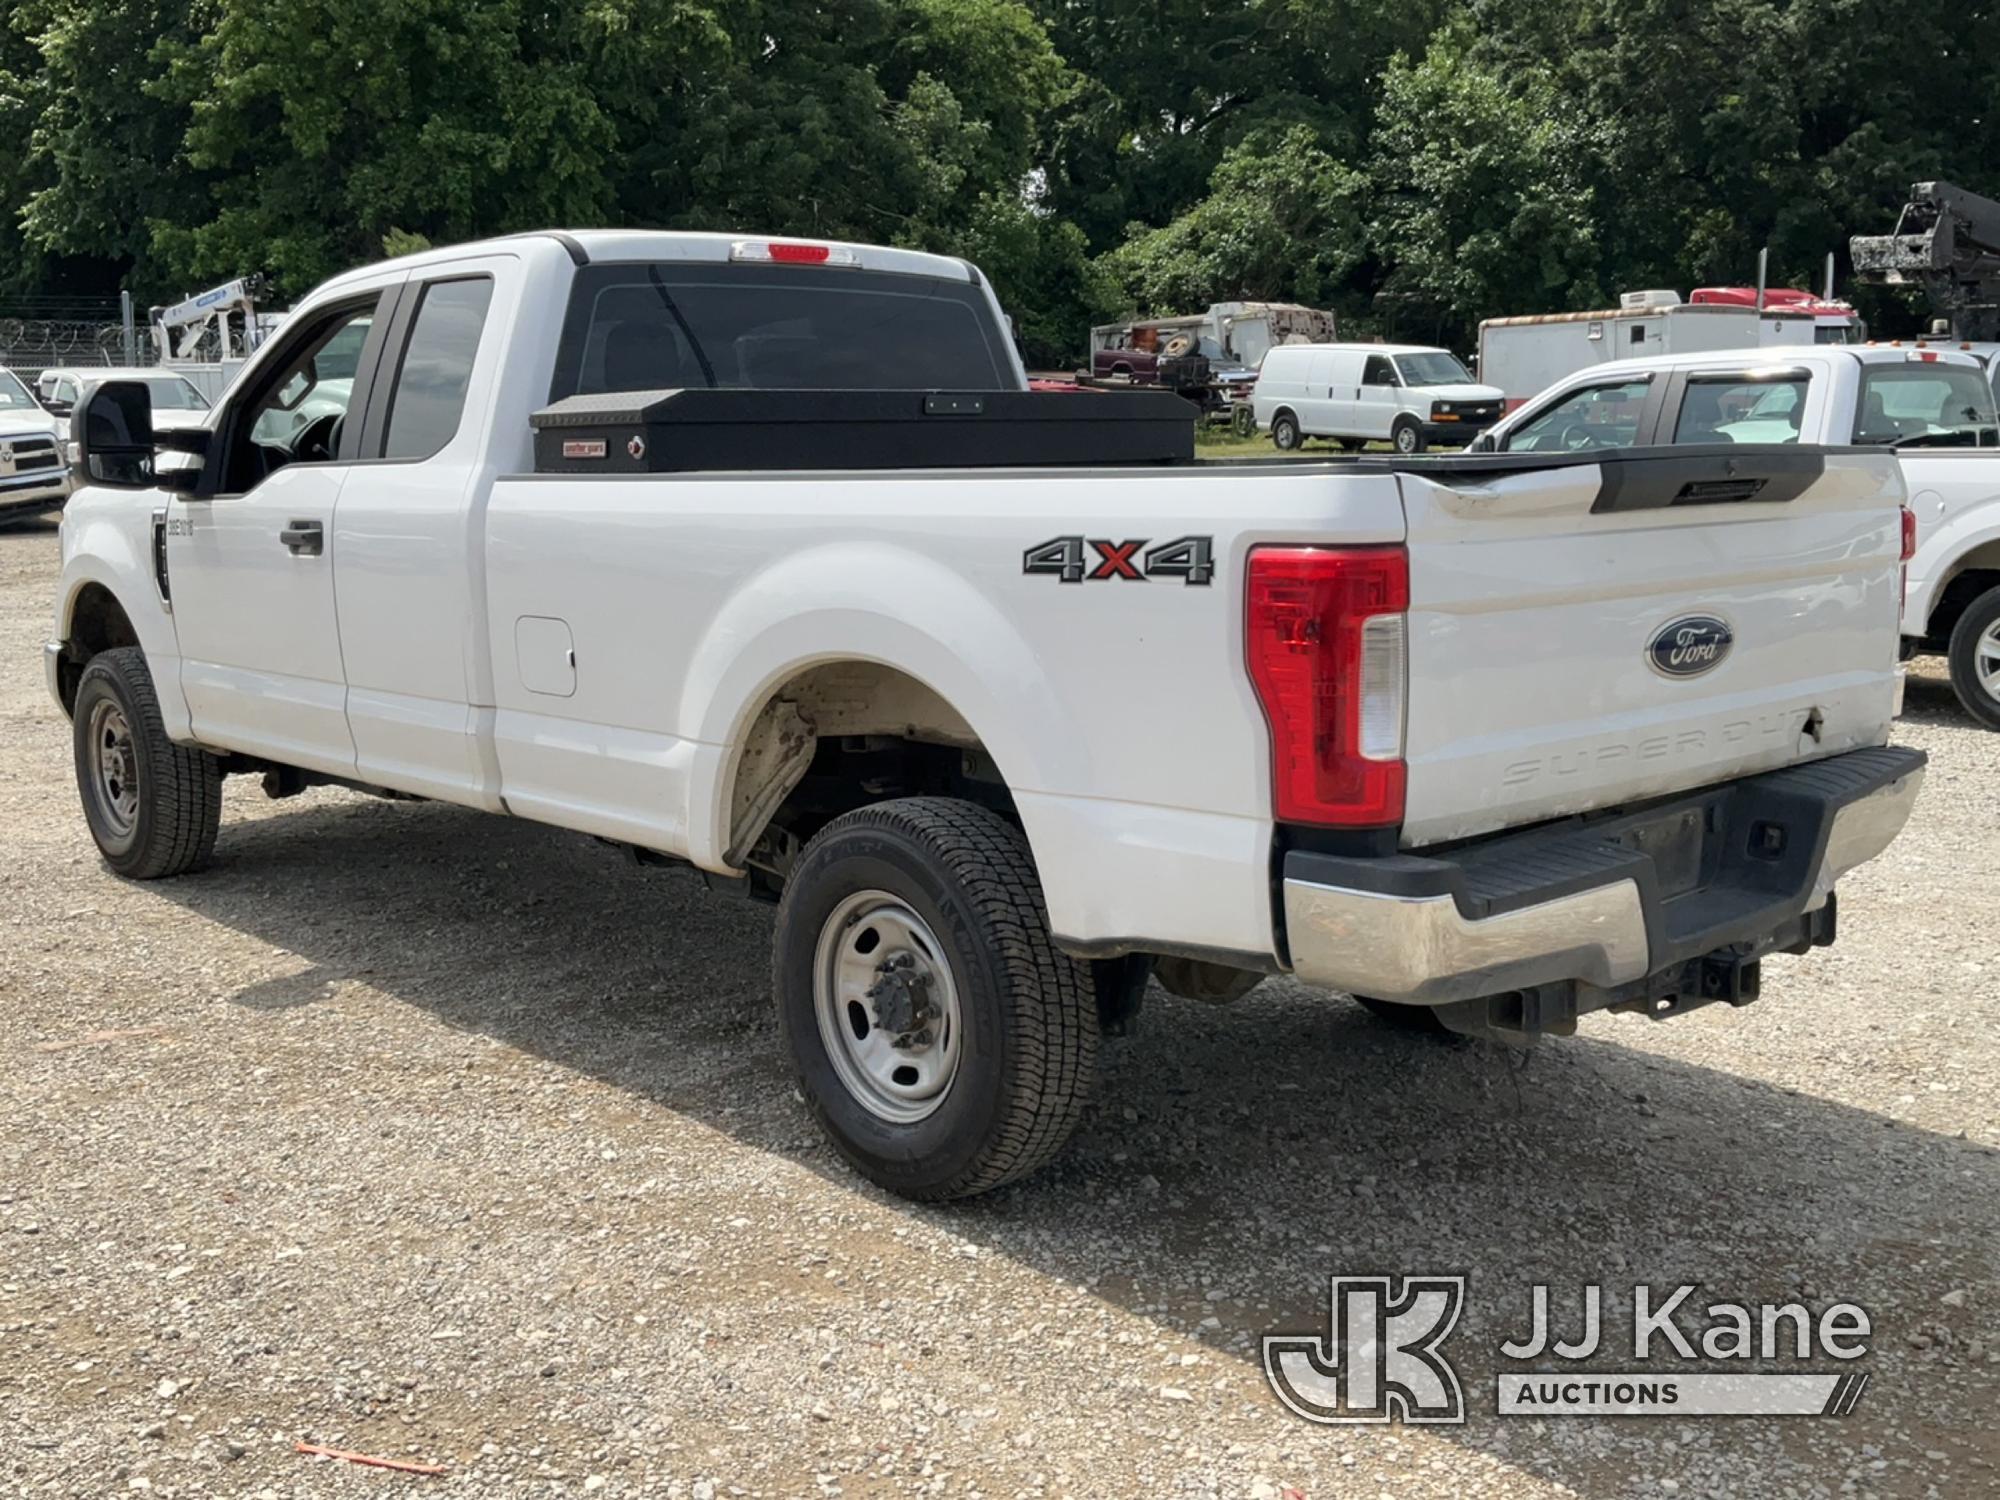 (Charlotte, NC) 2018 Ford F350 4x4 Extended-Cab Pickup Truck Runs & Moves) (Body Damage) (Seller Sta